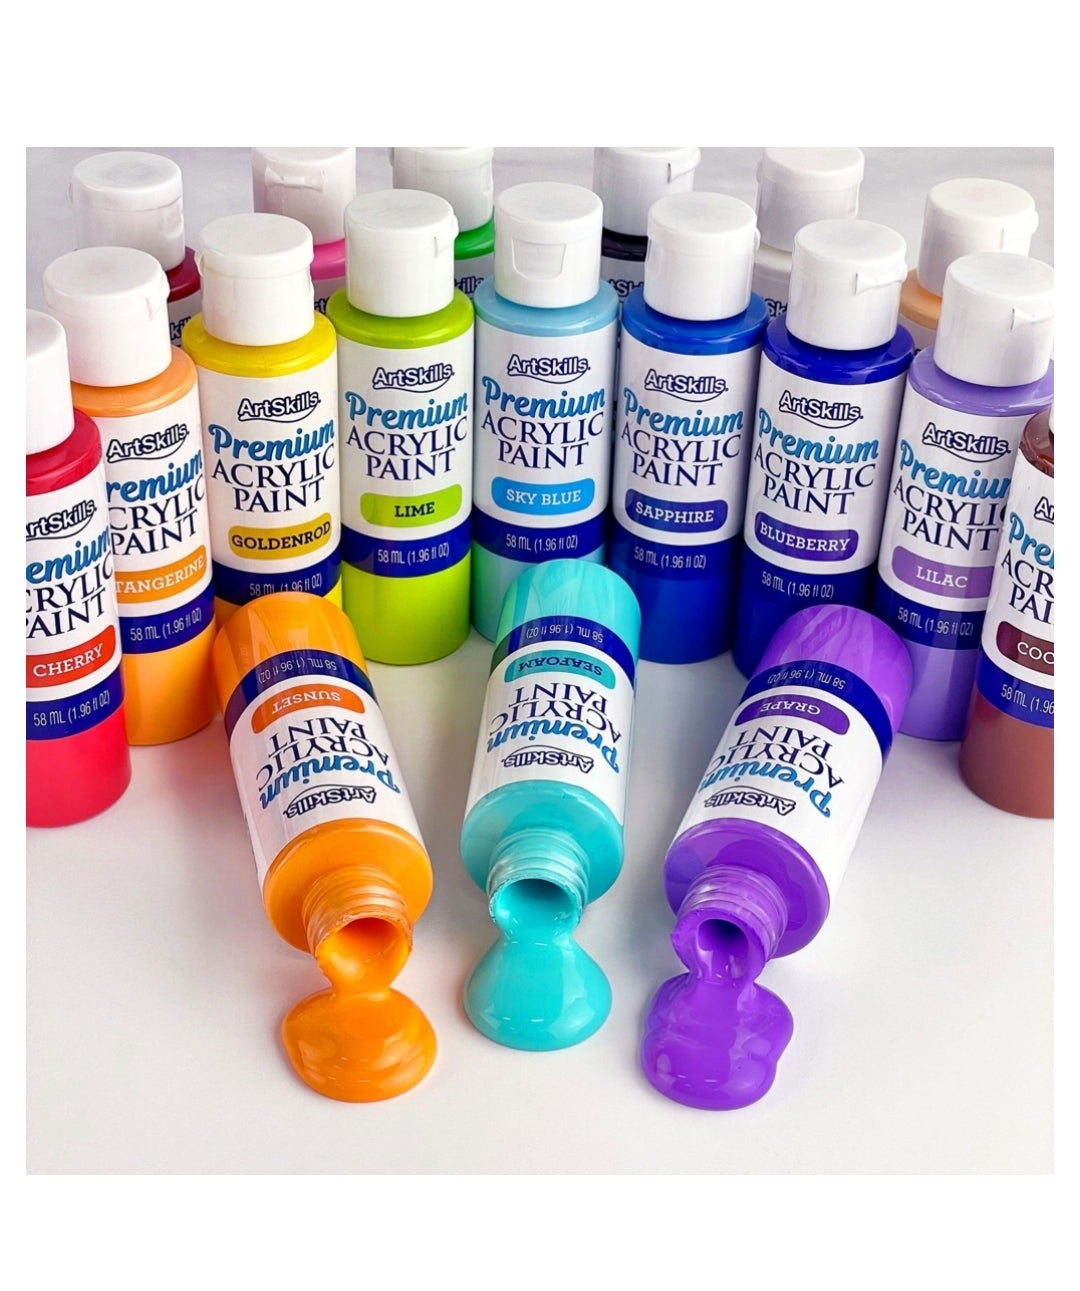 Open Artists Acrylic Paints and Sets